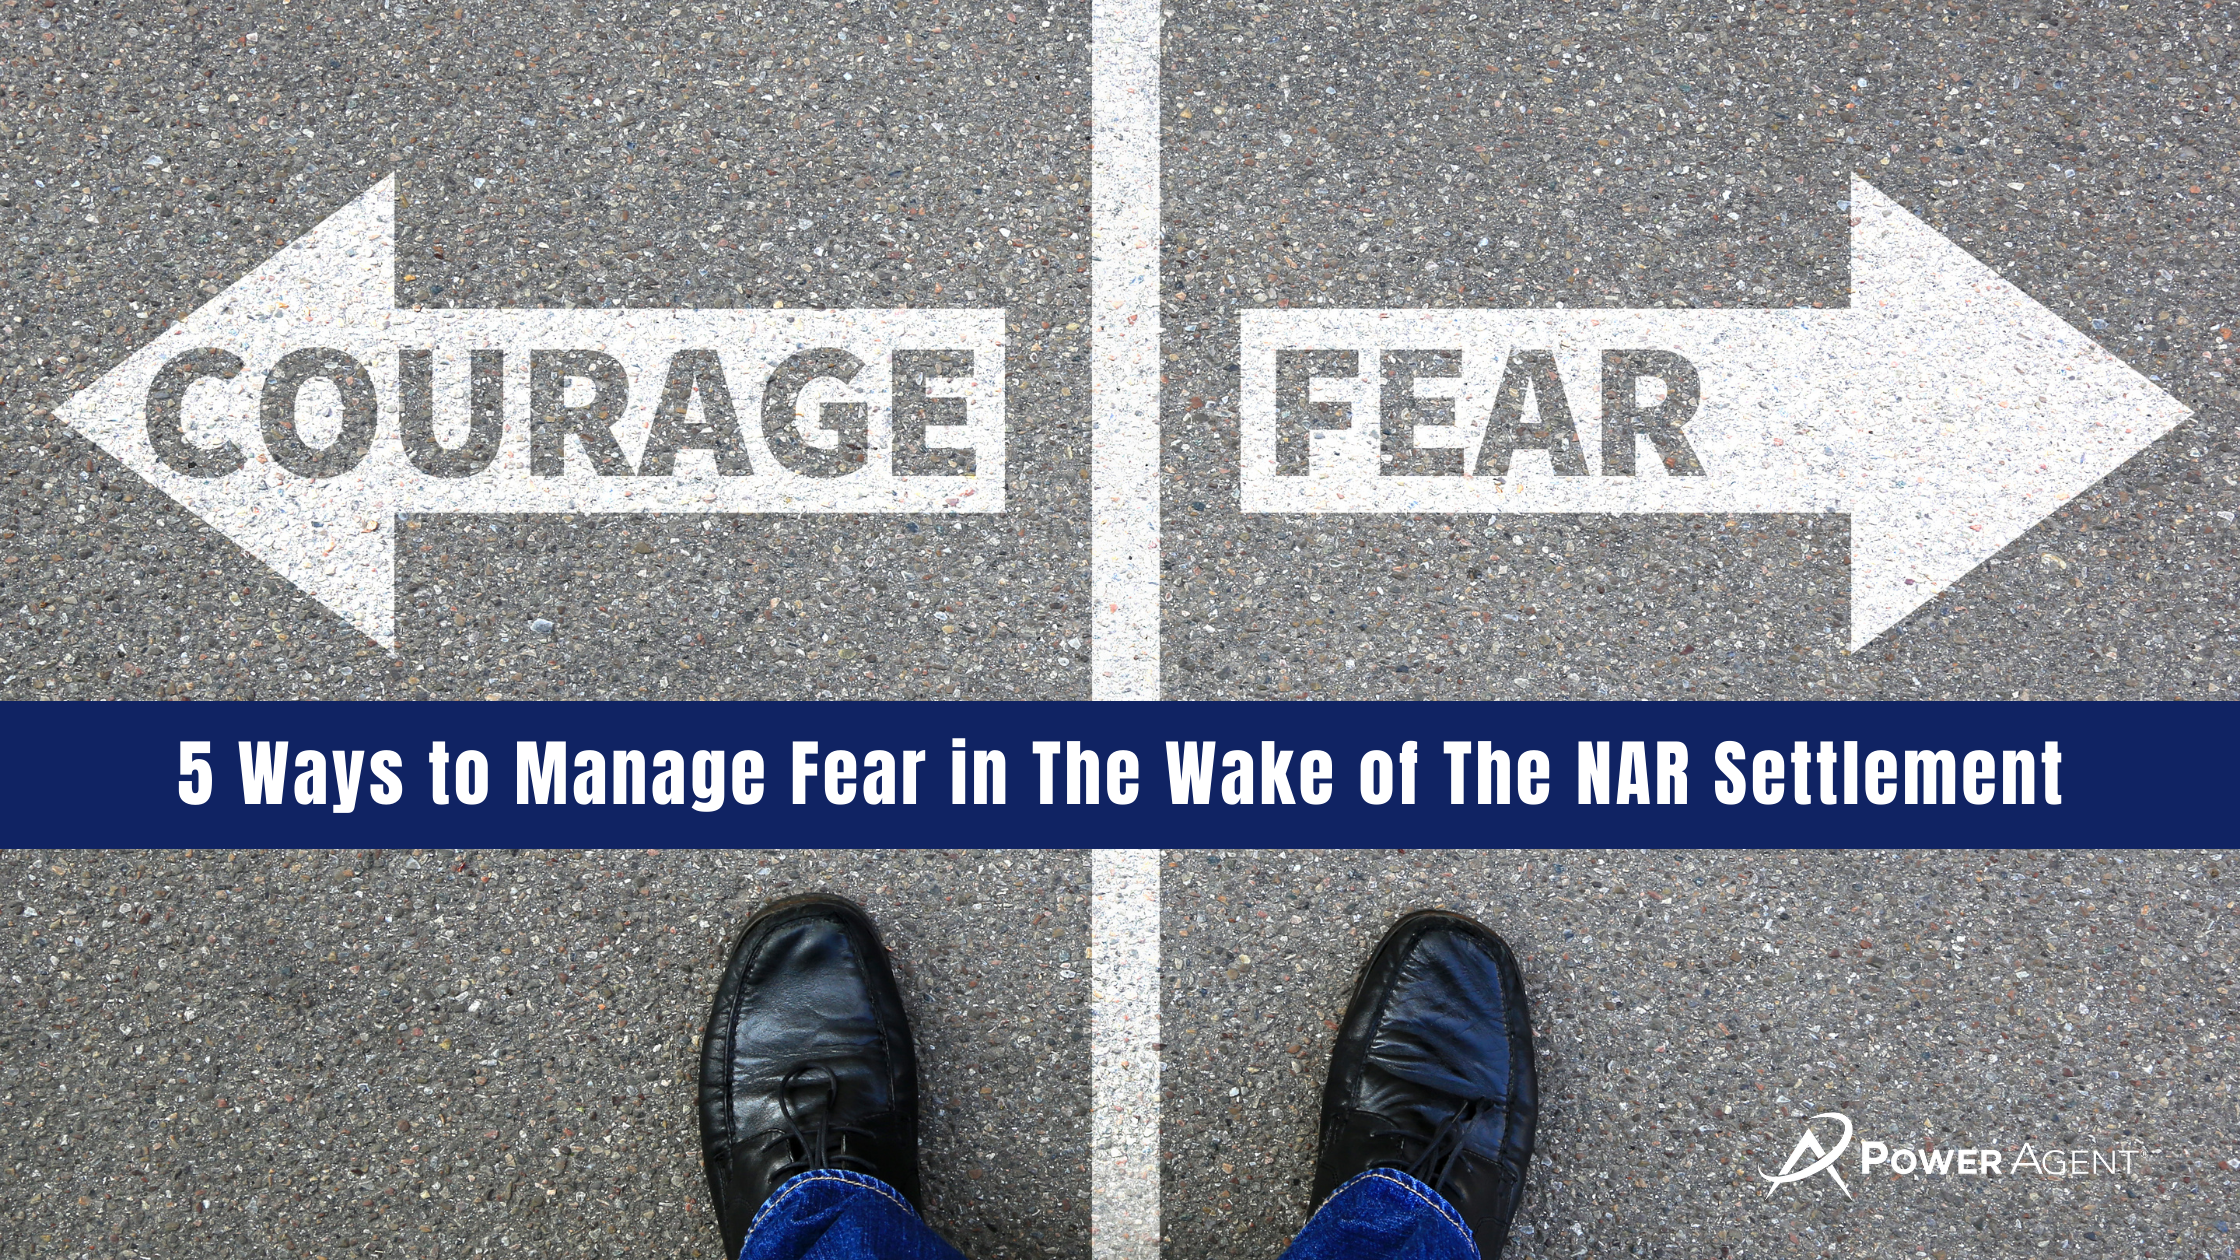 5 Ways to Manage Fear in the Wake of the NAR Lawsuit